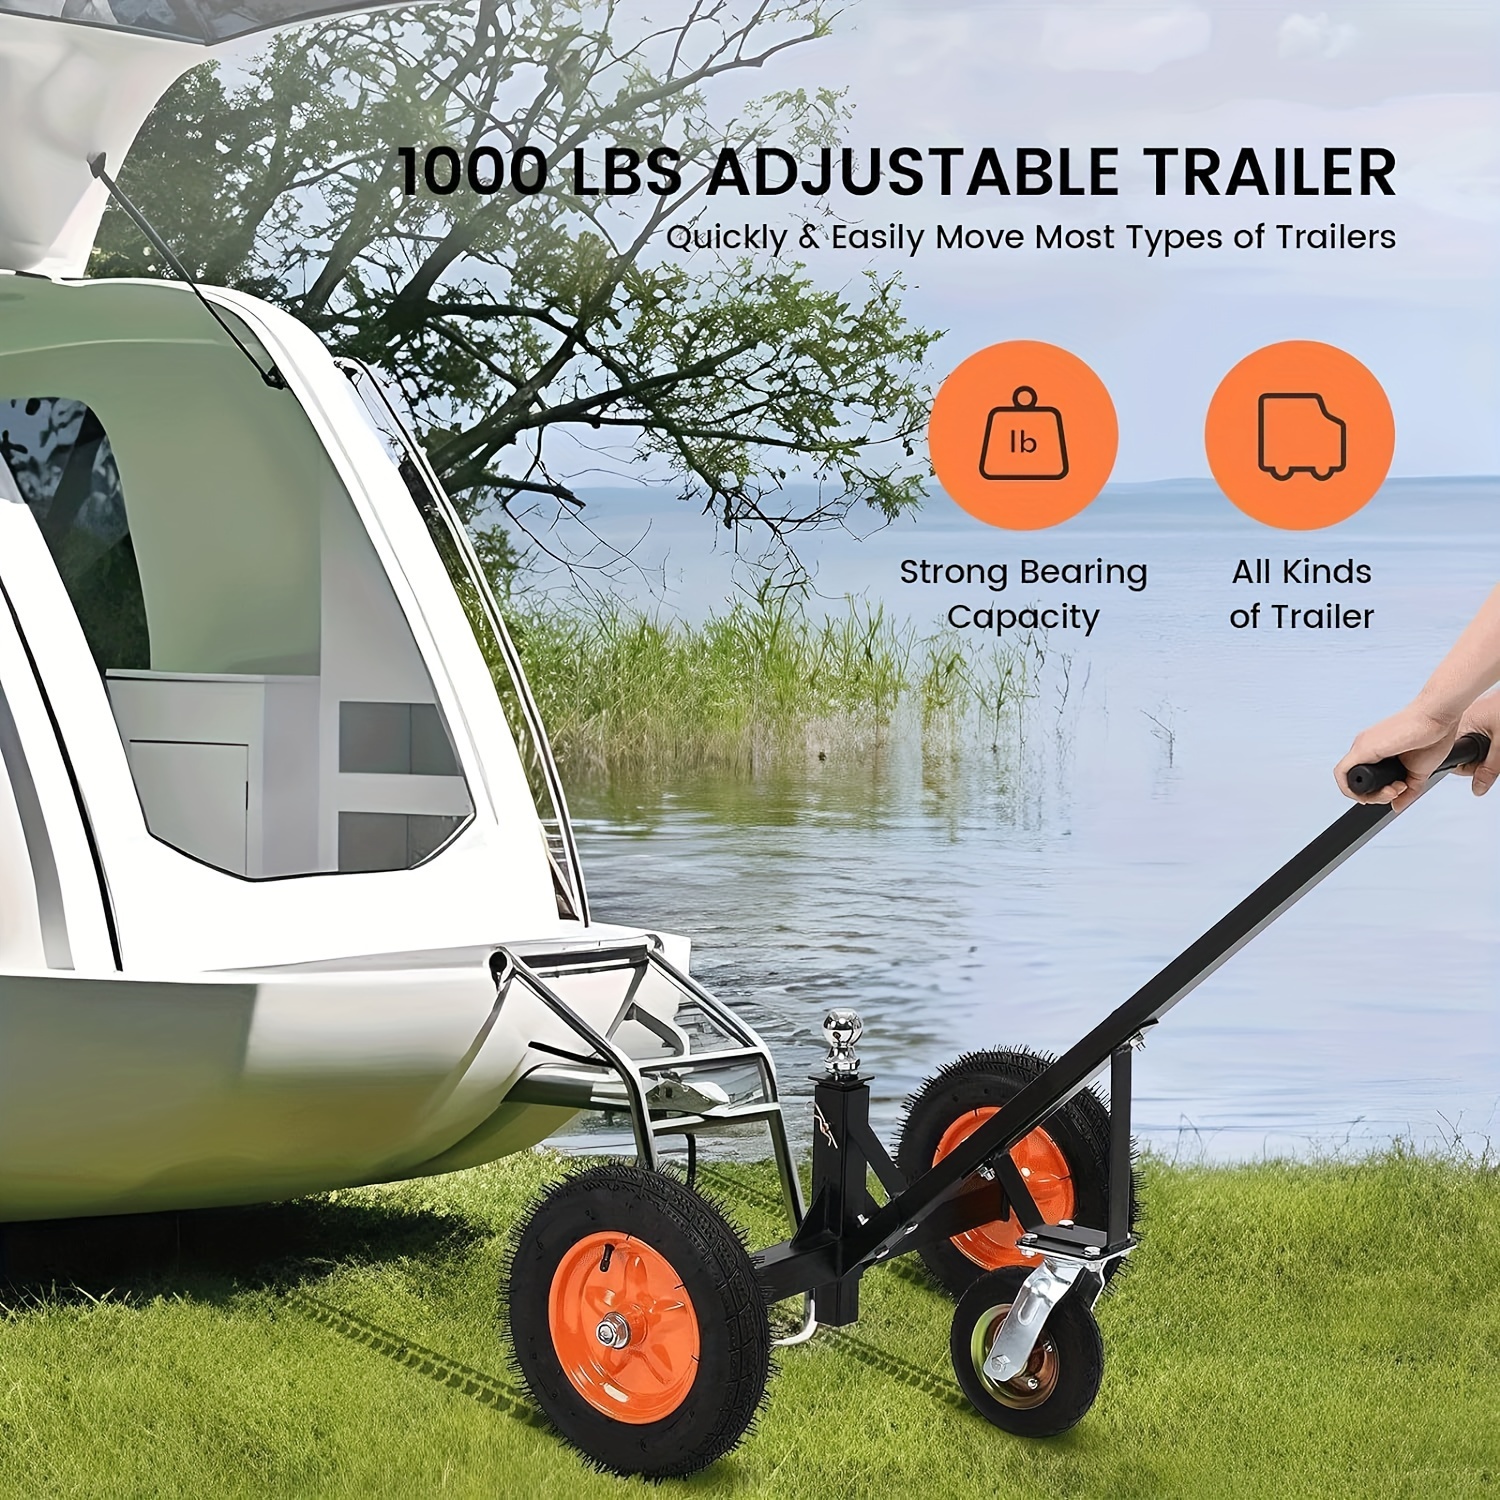 

Adjustable Trailer Dolly For Moving Boat With 1000lbs Load Capacity, Heavy-duty Carbon Steel Mover, Height Adjustable From 17.7'' To 25.6'', For Moving Boat, Utility, Cargo, And Rv Trailers